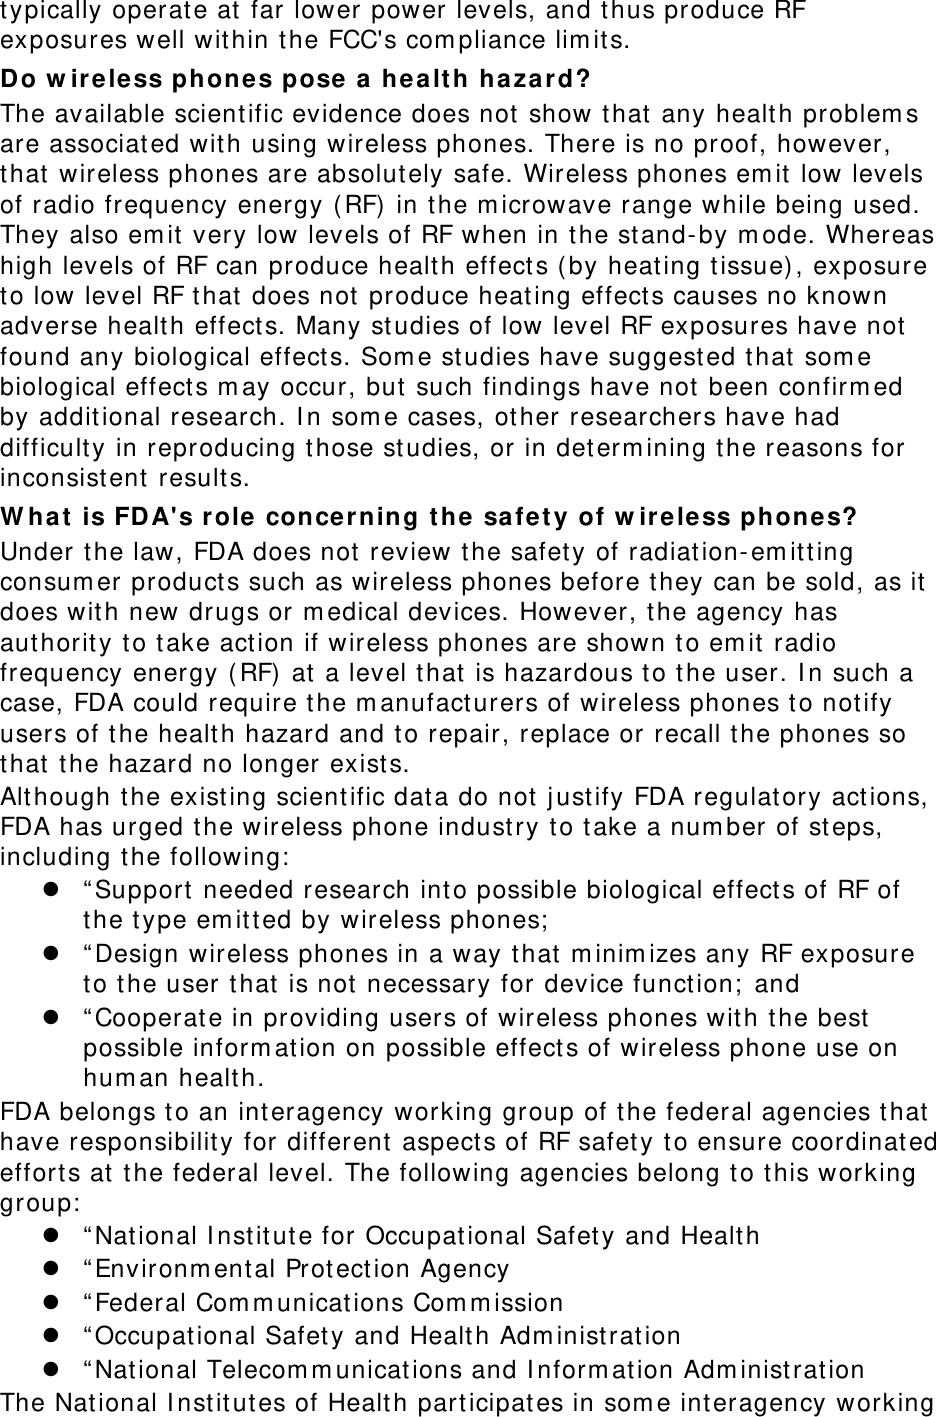 typically operate at  far lower power levels, and thus produce RF exposures well within t he FCC&apos;s com pliance lim it s. Do w ireless phone s pose  a healt h hazard? The available scient ific evidence does not  show that any healt h problem s are associated with using wireless phones. There is no proof, however, that wireless phones are absolut ely safe. Wireless phones em it low levels of radio frequency energy ( RF) in the m icrowave range while being used. They also em it  very low levels of RF when in the st and-by m ode. Whereas high levels of RF can produce healt h effect s ( by heat ing t issue) , exposure to low level RF that does not  produce heat ing effect s causes no known adverse healt h effects. Many studies of low level RF exposures have not found any biological effect s. Som e studies have suggested that som e biological effect s m ay occur, but  such findings have not been confirm ed by addit ional research. I n som e cases, other researchers have had difficult y in reproducing those st udies, or in det erm ining the reasons for inconsist ent results. W ha t  is FDA&apos;s role  conce rning t he safe t y of w irele ss phones? Under t he law, FDA does not review the safet y of radiation-em it ting consum er products such as wireless phones before t hey can be sold, as it does with new drugs or m edical devices. However, the agency has aut horit y t o t ake act ion if wireless phones are shown t o em it radio frequency energy ( RF) at a level that is hazardous t o t he user. I n such a case, FDA could require t he m anufacturers of wireless phones t o notify users of t he healt h hazard and to repair, replace or recall t he phones so that the hazard no longer exist s. Alt hough the existing scient ific dat a do not  j ustify FDA regulat ory act ions, FDA has urged the wireless phone industry t o t ake a num ber of st eps, including t he following:  z “ Support needed research into possible biological effect s of RF of the t ype em itted by wireless phones;  z “ Design wireless phones in a way t hat  m inim izes any RF exposure to the user that is not  necessary for device funct ion;  and z “ Cooperate in providing users of wireless phones wit h the best possible inform at ion on possible effect s of wireless phone use on hum an healt h. FDA belongs t o an interagency working group of t he federal agencies that have responsibility for different  aspect s of RF safet y to ensure coordinat ed effort s at  t he federal level. The following agencies belong to this working group:  z “ Nat ional I nst itute for Occupat ional Safet y and Healt h z “ Environm ent al Protect ion Agency z “ Federal Com m unications Com m ission z “ Occupat ional Safet y and Health Adm inistrat ion z “ Nat ional Telecom m unications and I nform at ion Adm inist rat ion The Nat ional I nstit utes of Healt h part icipat es in som e int eragency working 